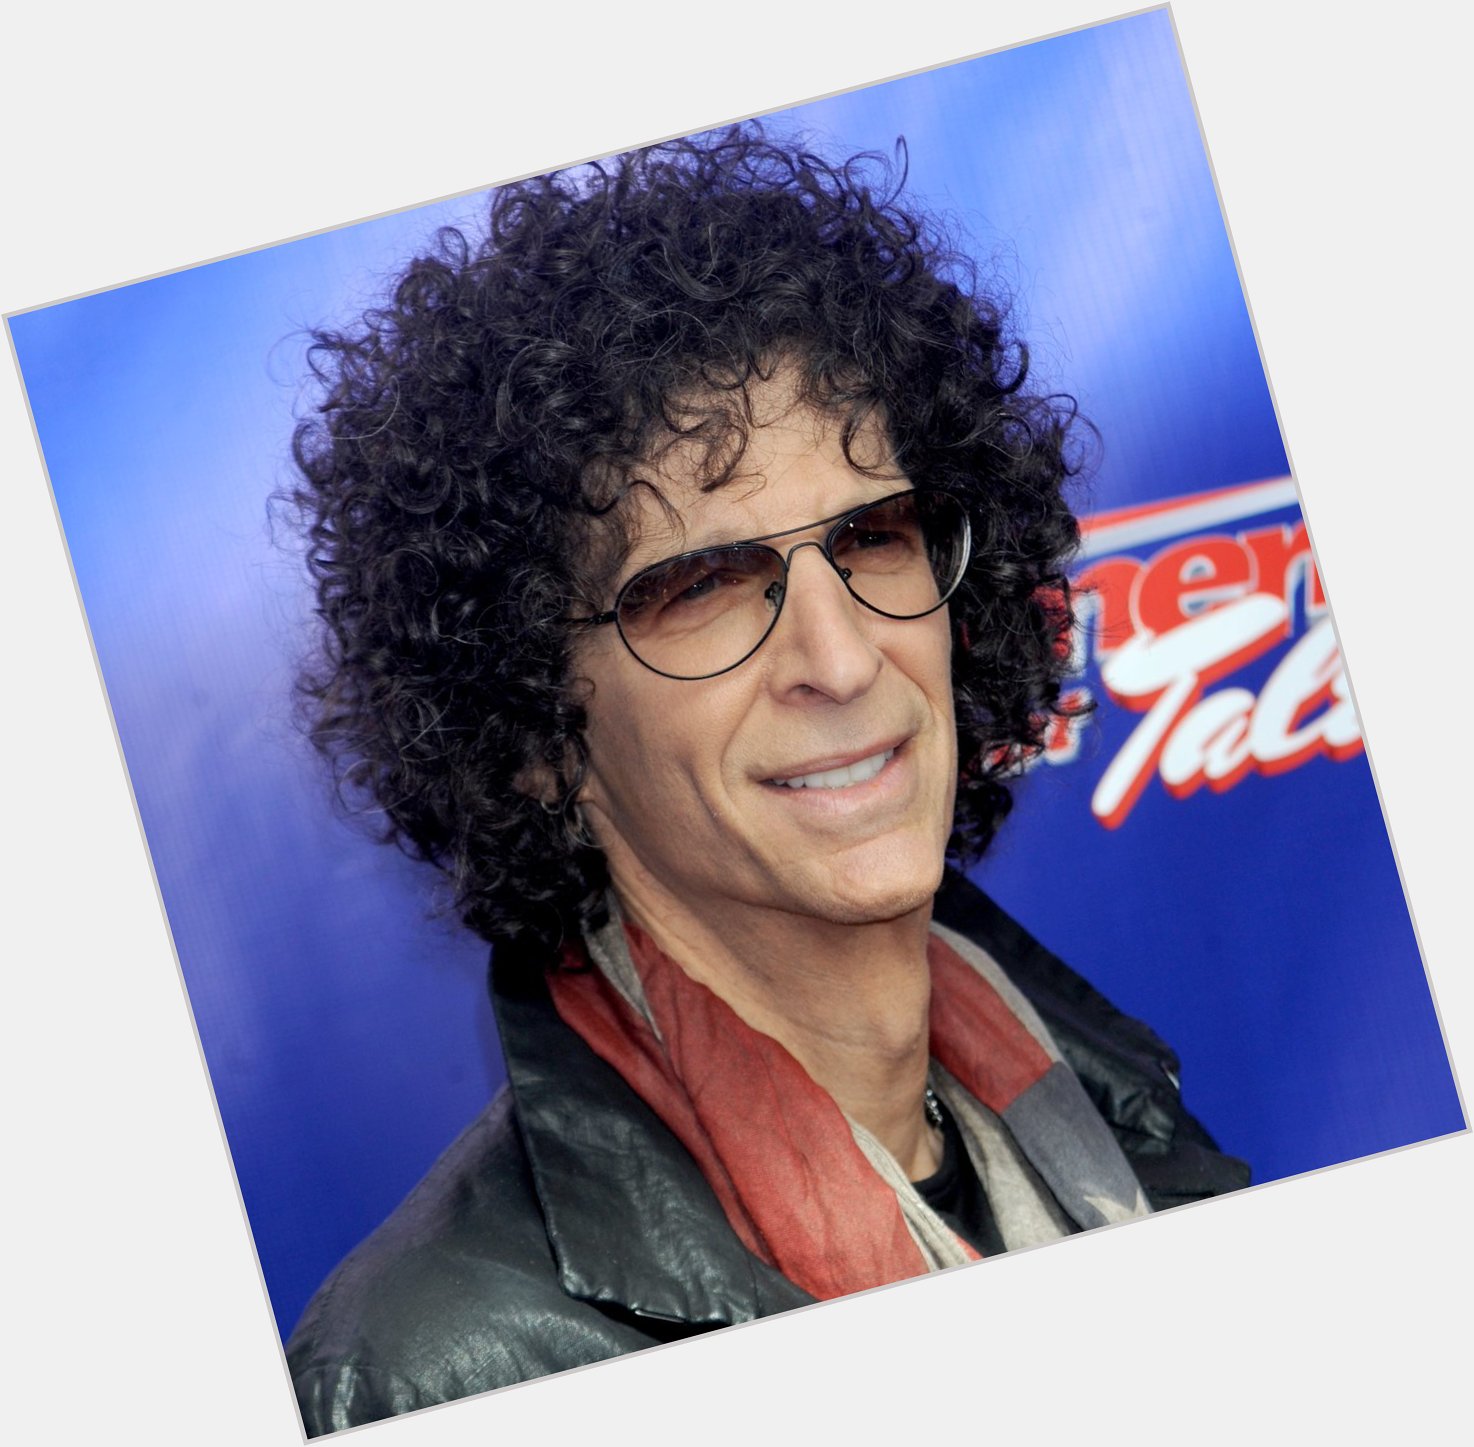 Happy Birthday Howard Stern! Make your way over to The Tipsy Crow tonight + enjoy $5 Jim Beam Apple from 8pm-10pm! 